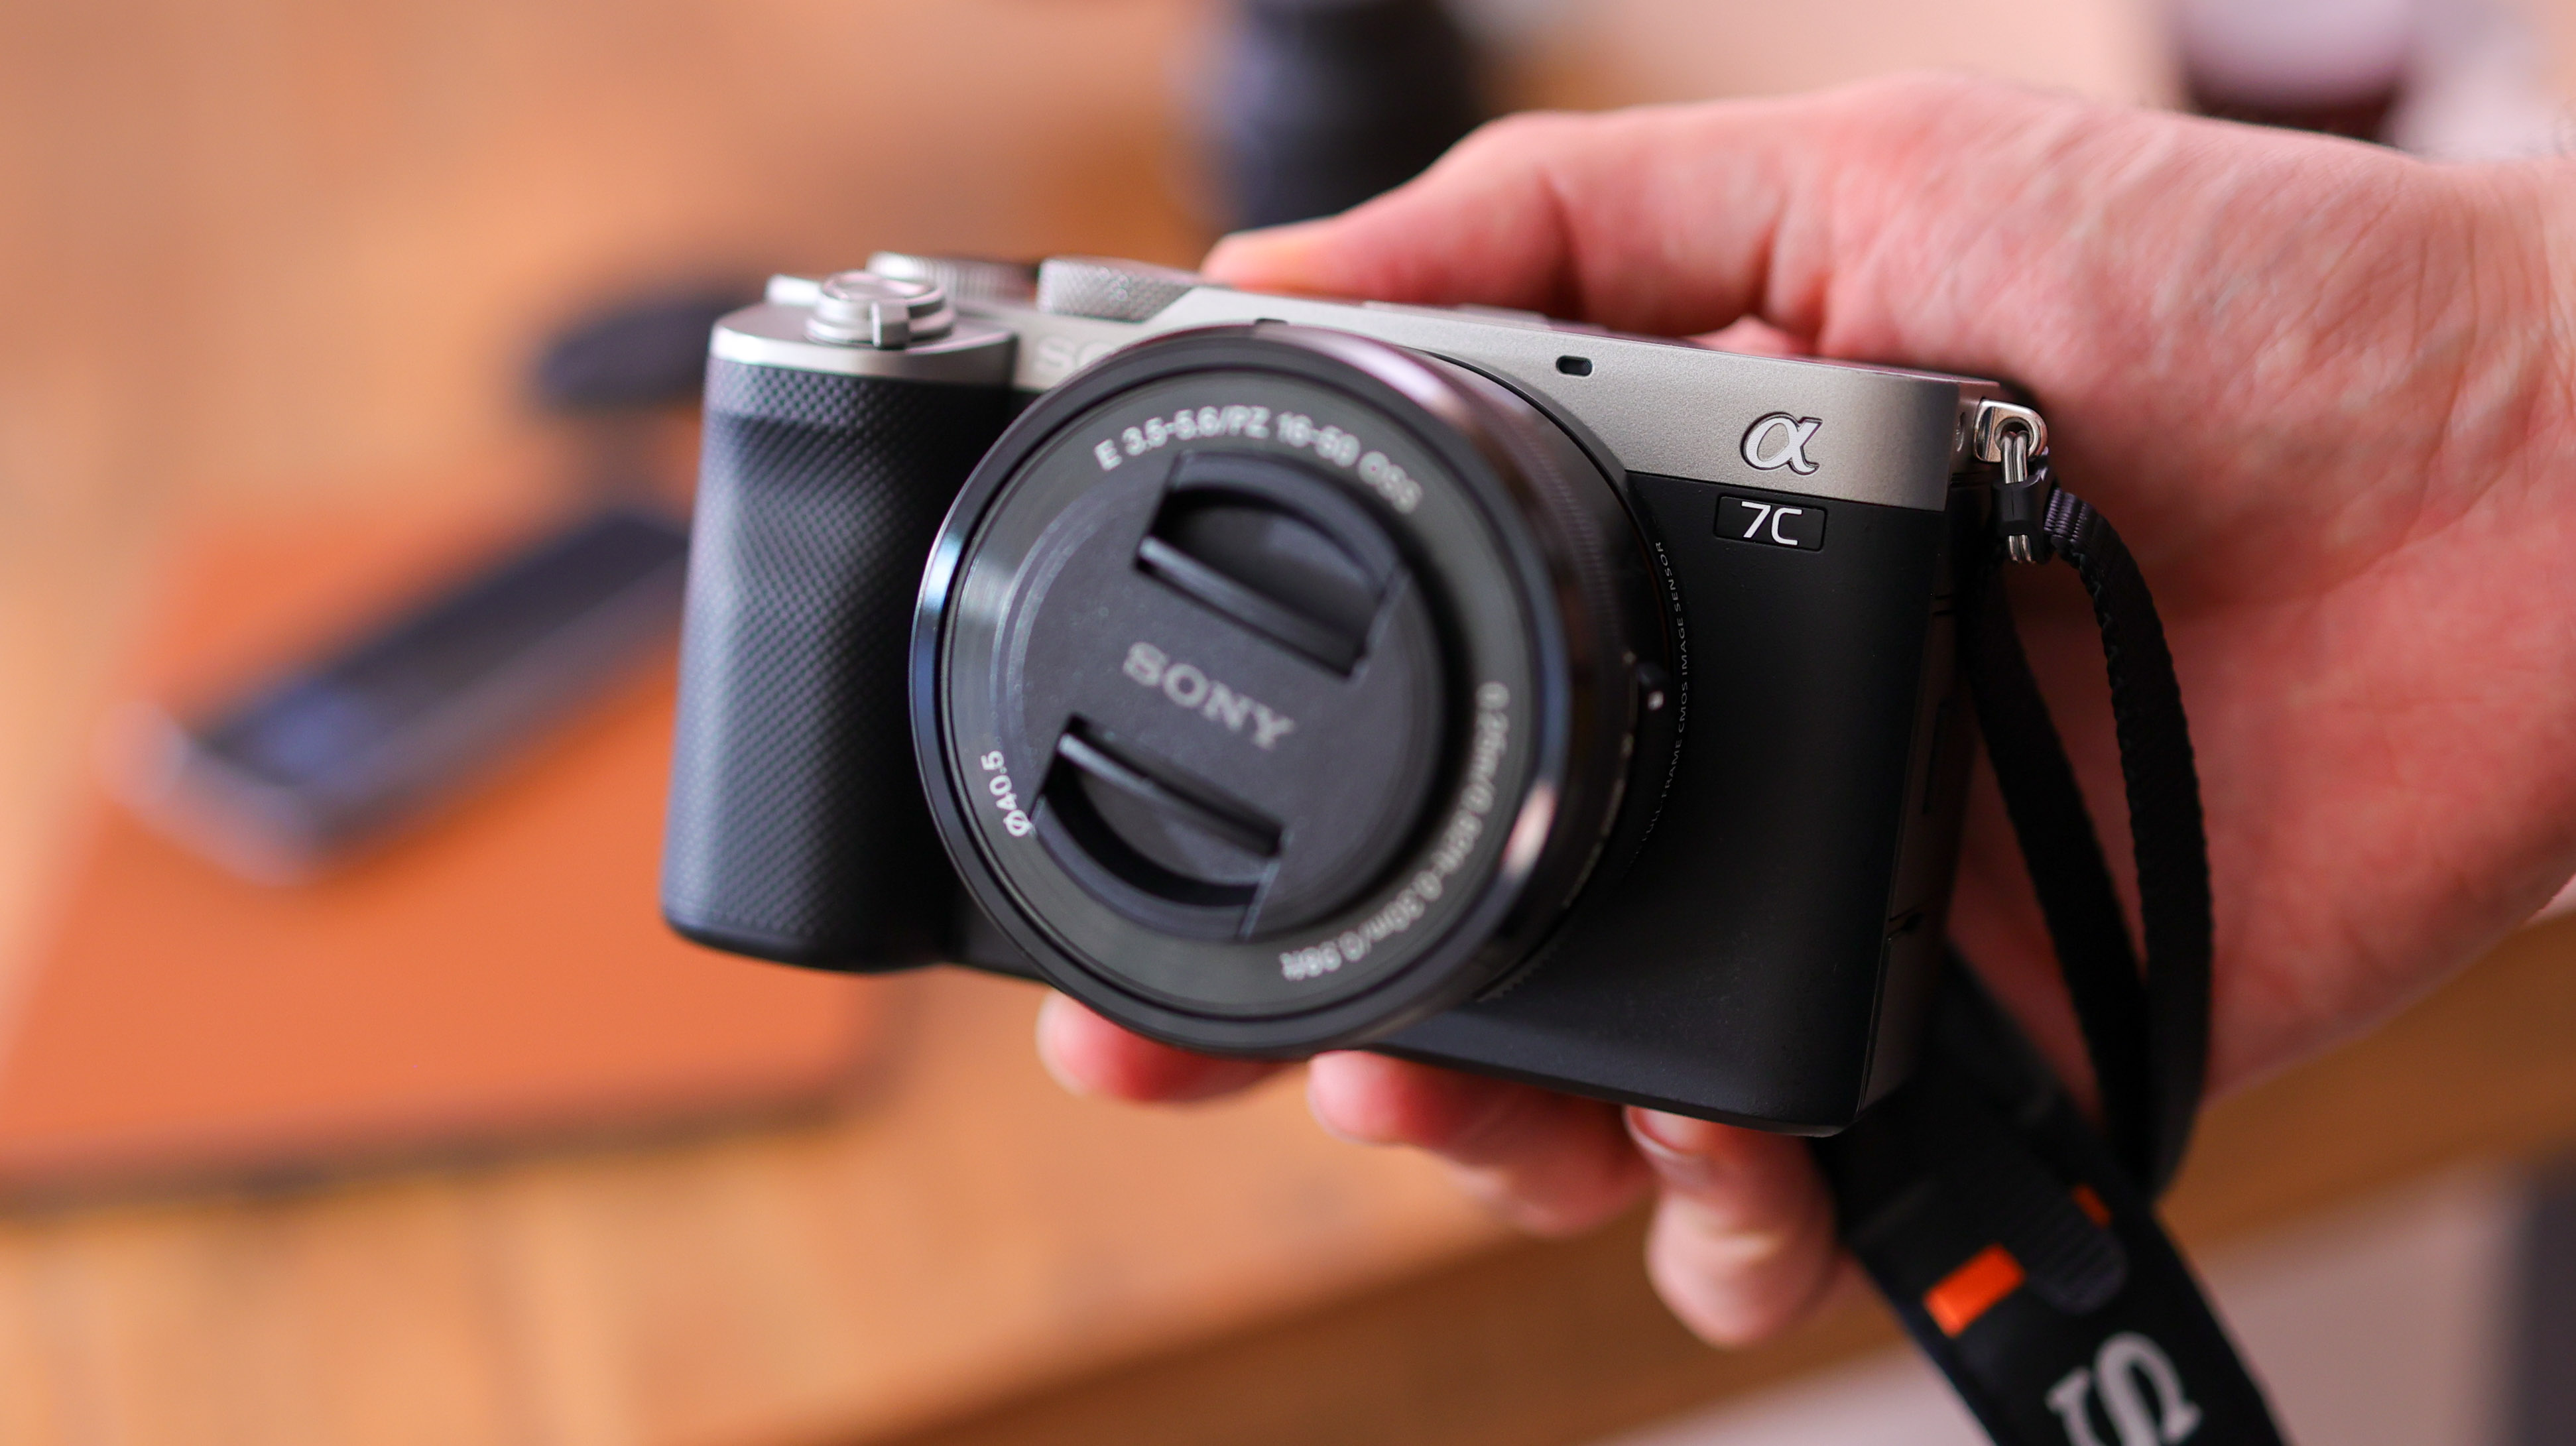 Rumour suggests upcoming Sony a6700 APS-C mirrorless camera with 4K 120 FPS  video, updated AI processor coming in July -  News